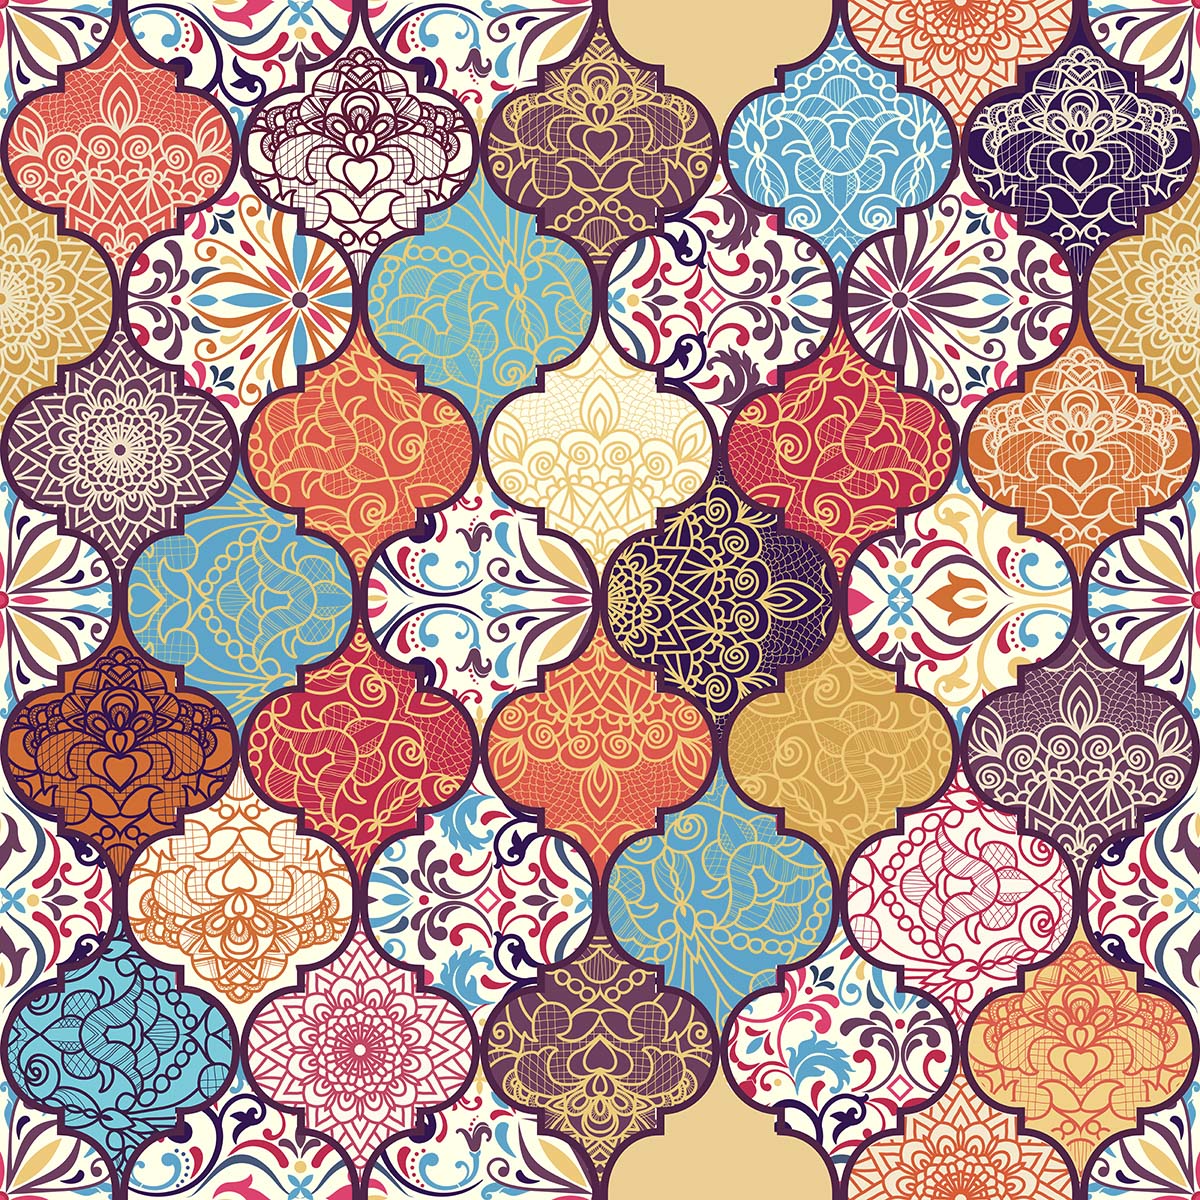 A colorful pattern of ornate shapes